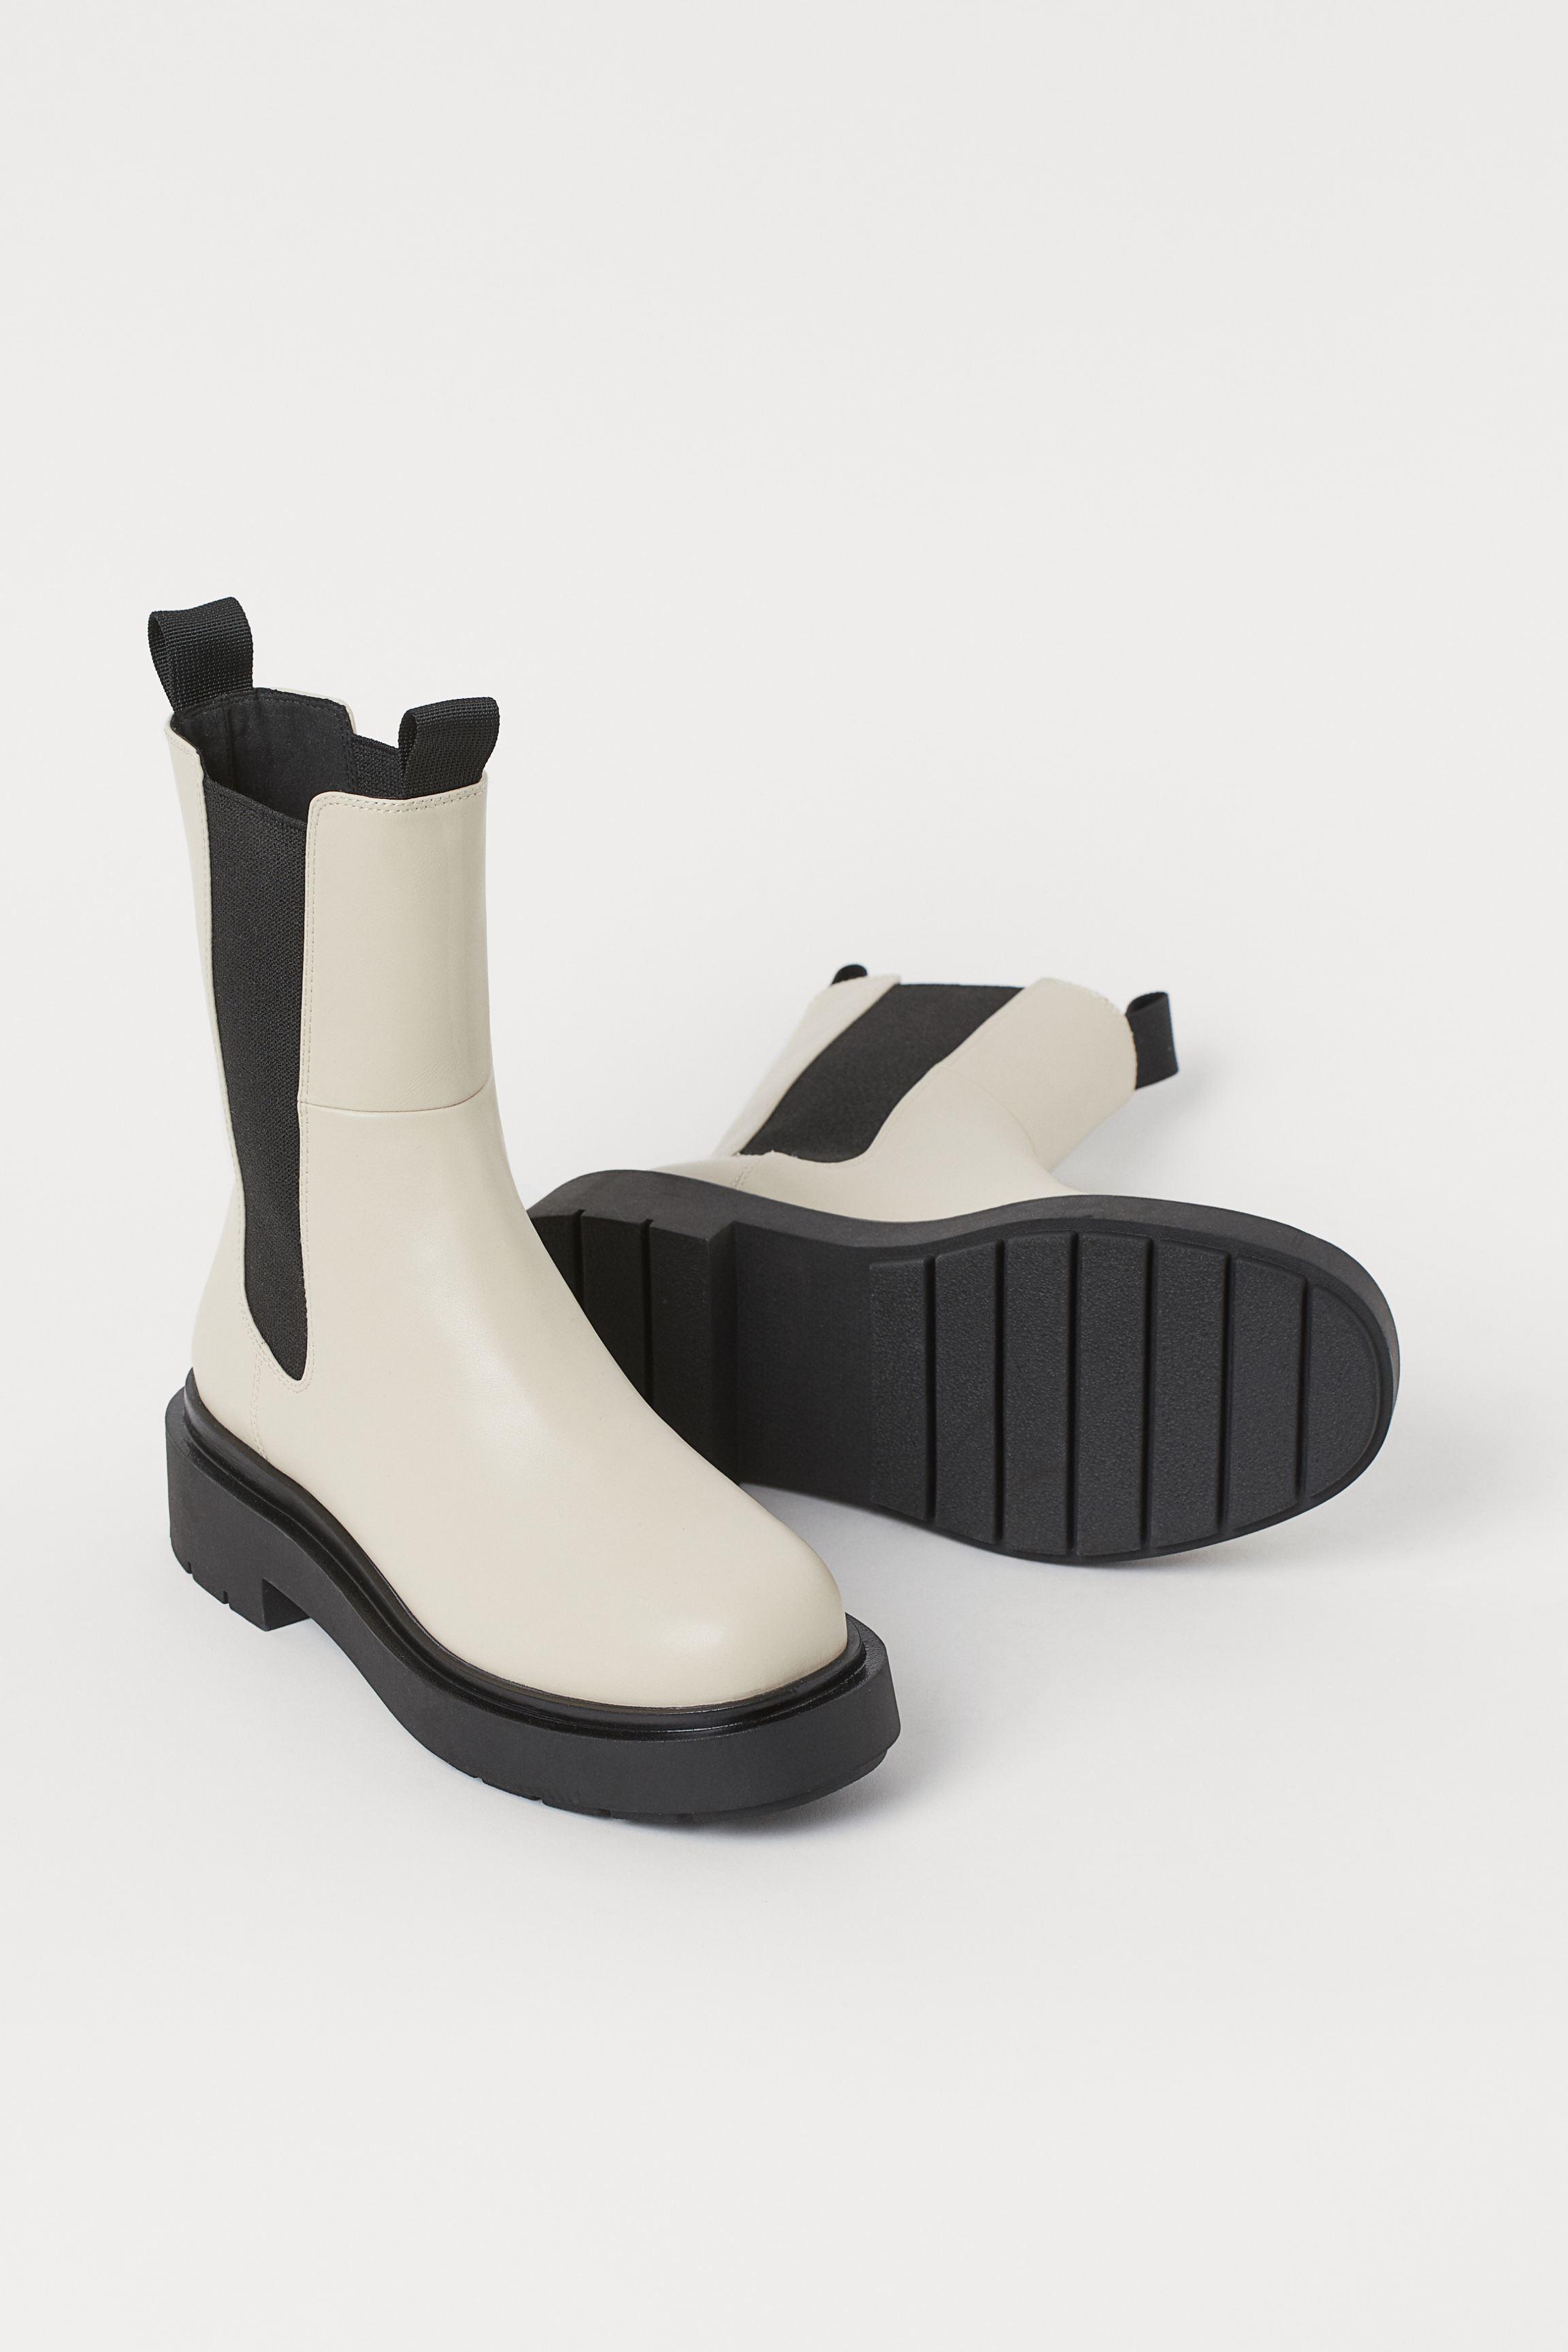 H&M High Profile Chelsea Boots in Light Beige - Lyst